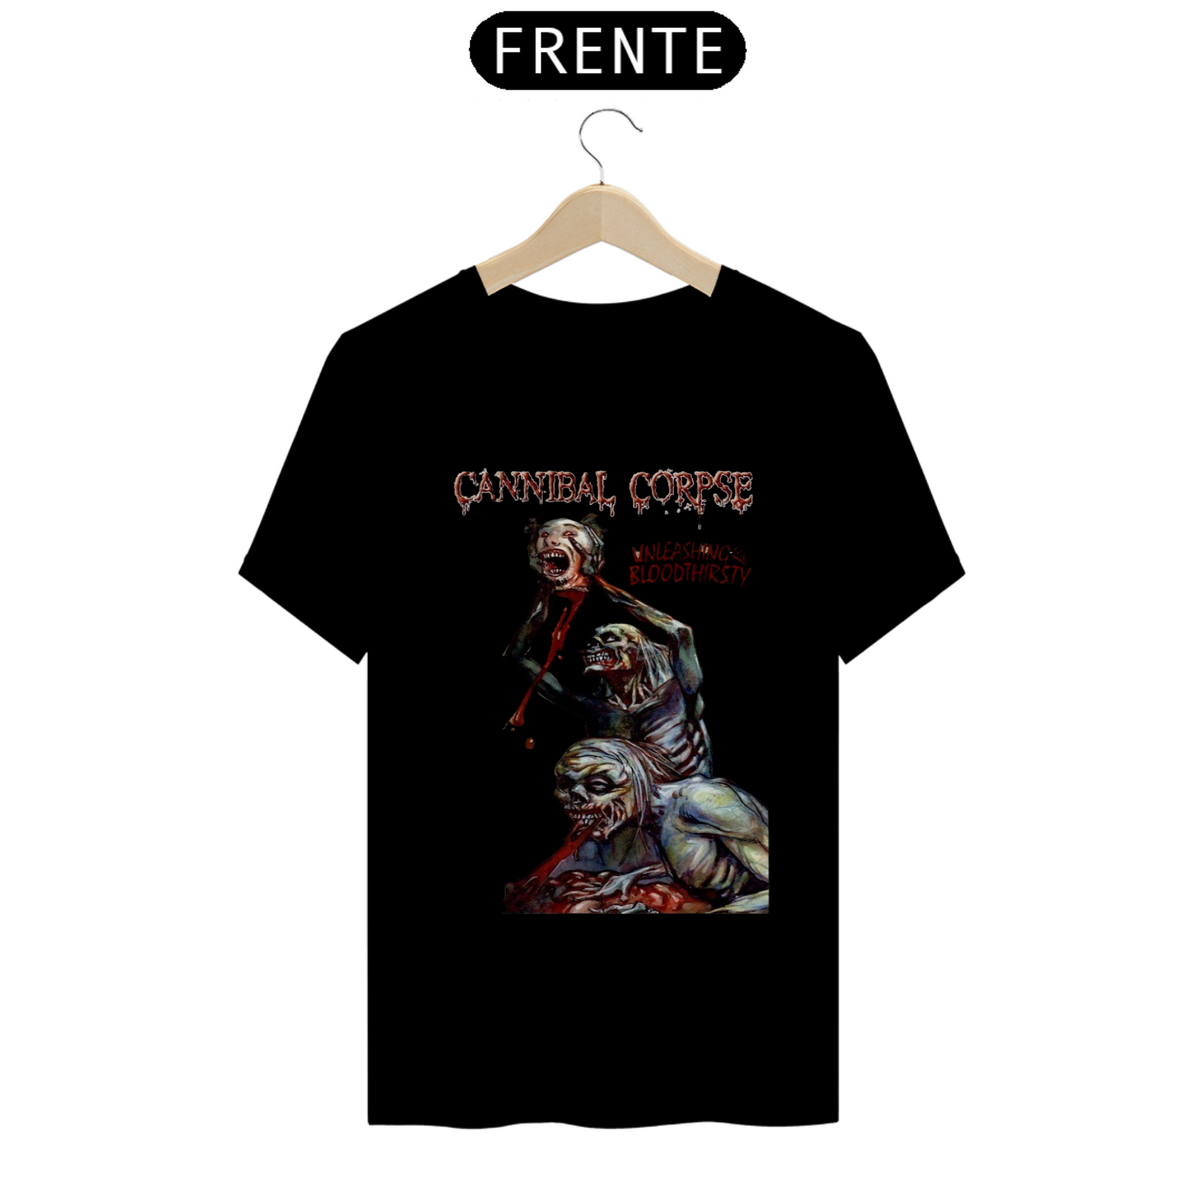 Nome do produto: Cannibal Corpse - Unleashing the Bloodthirst